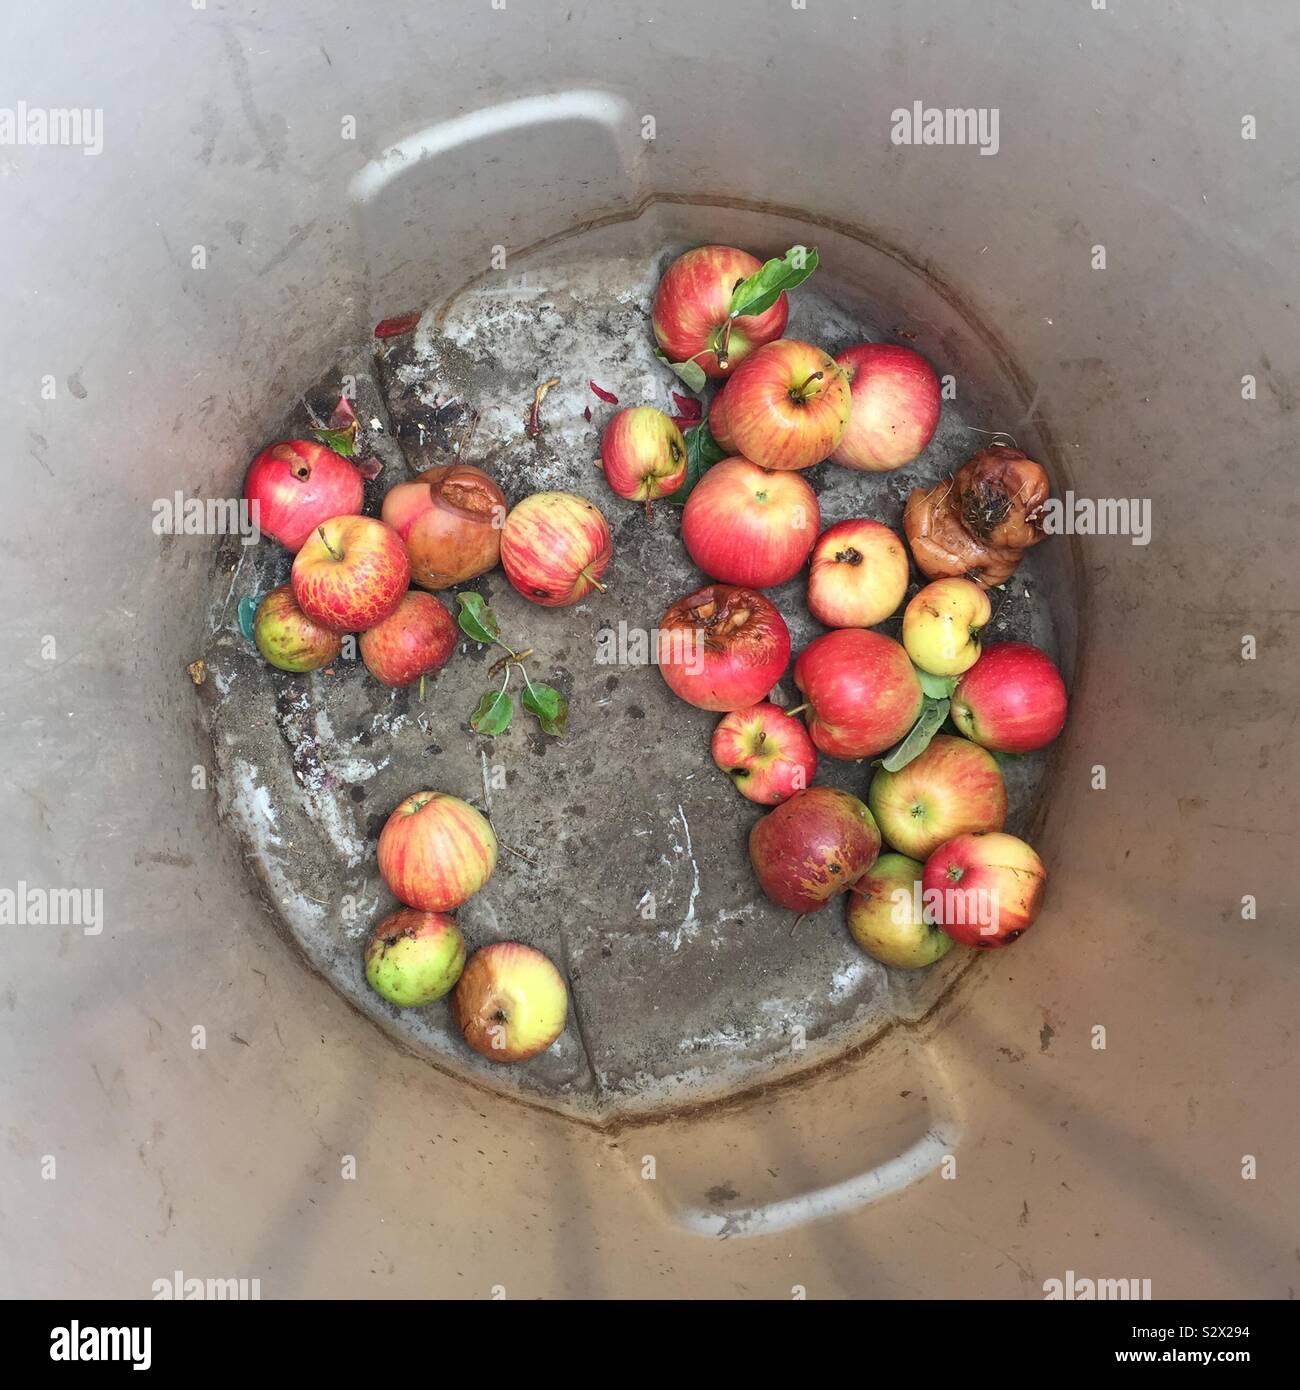 Rotten apples in the bottom of an orchard bin Stock Photo